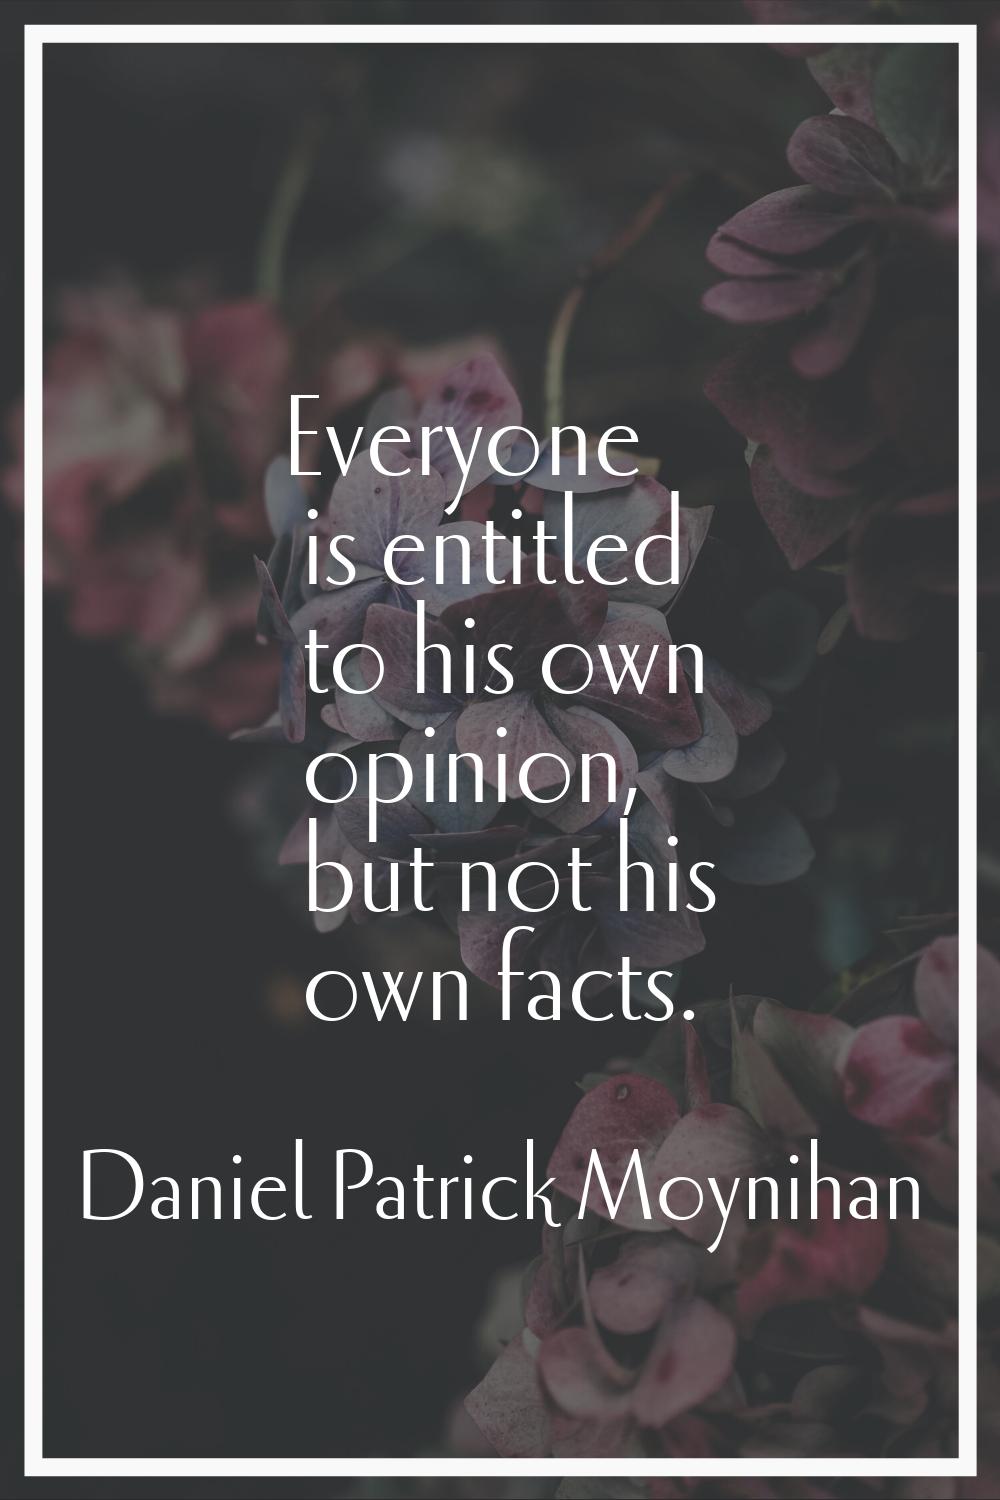 Everyone is entitled to his own opinion, but not his own facts.